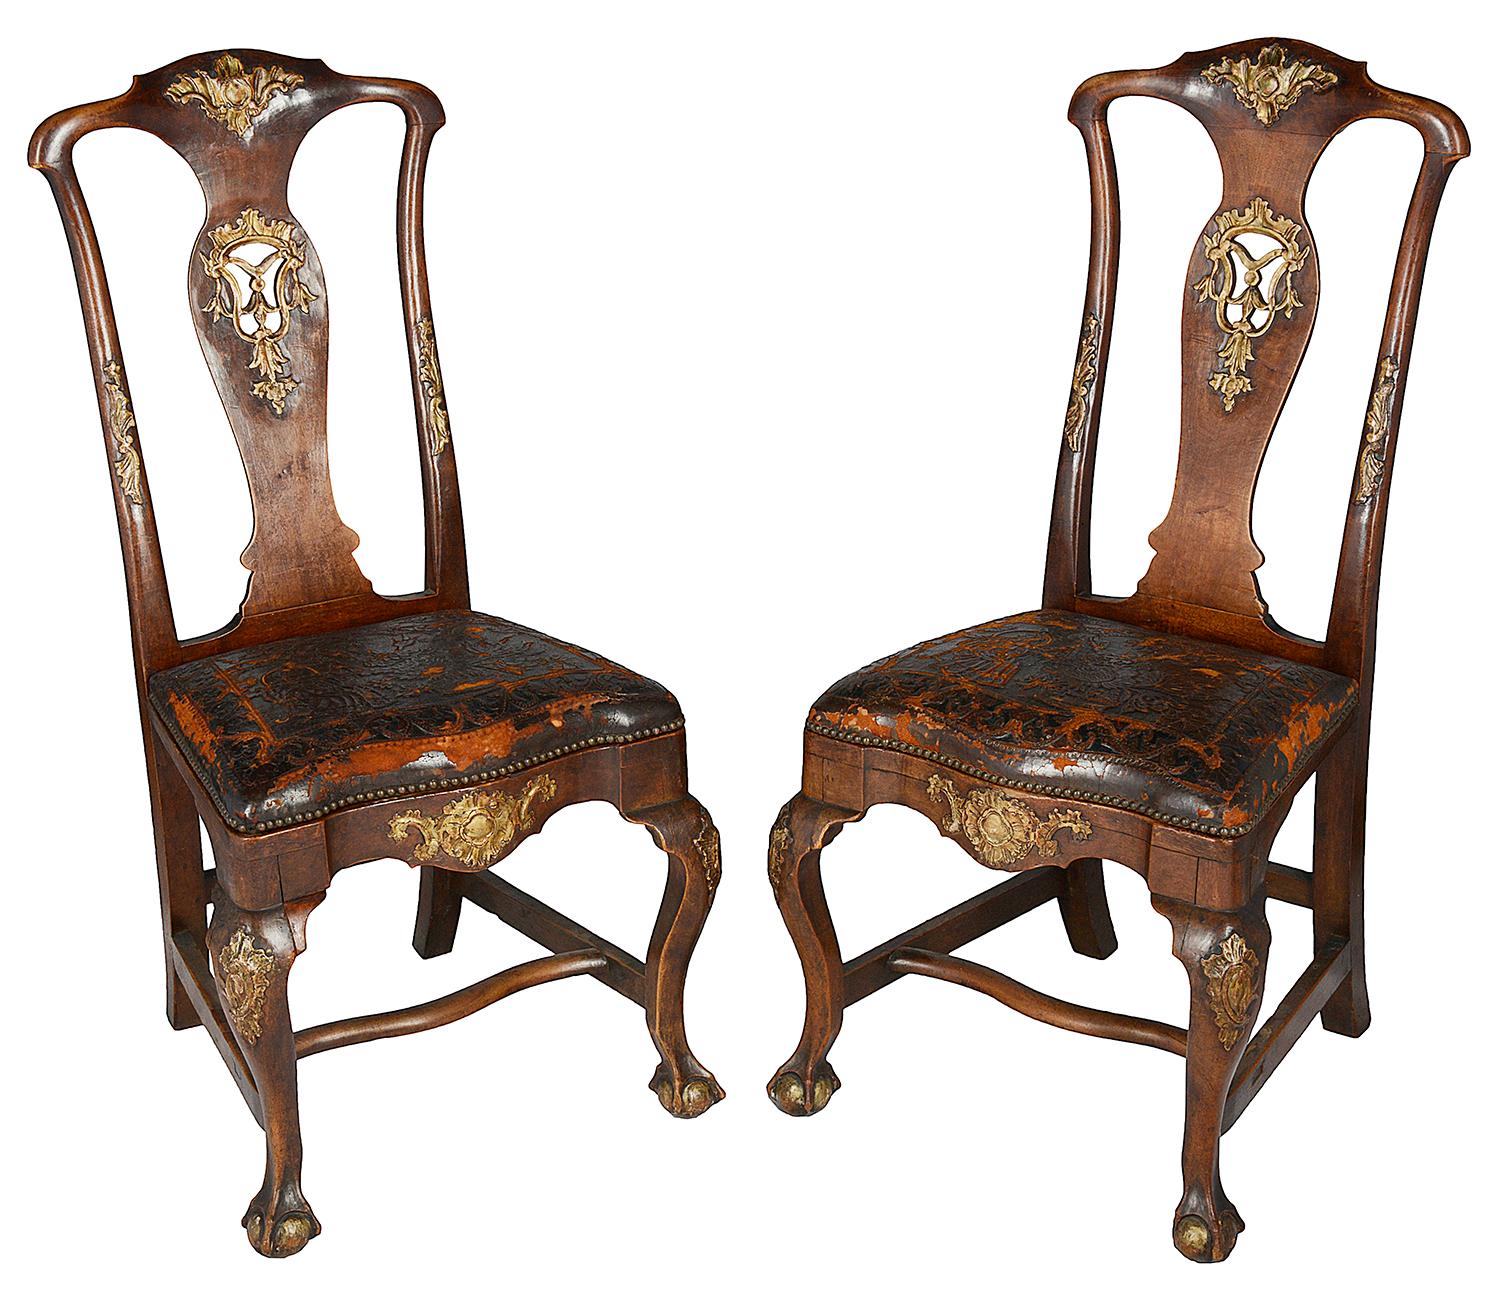 A very good quality set of twelve 18th century Portuguese dining chairs, each with carved and fretted gilded foliate decoration, stuff over embossed leather seats, raised on elegant cabriole legs, united by H stretchers.